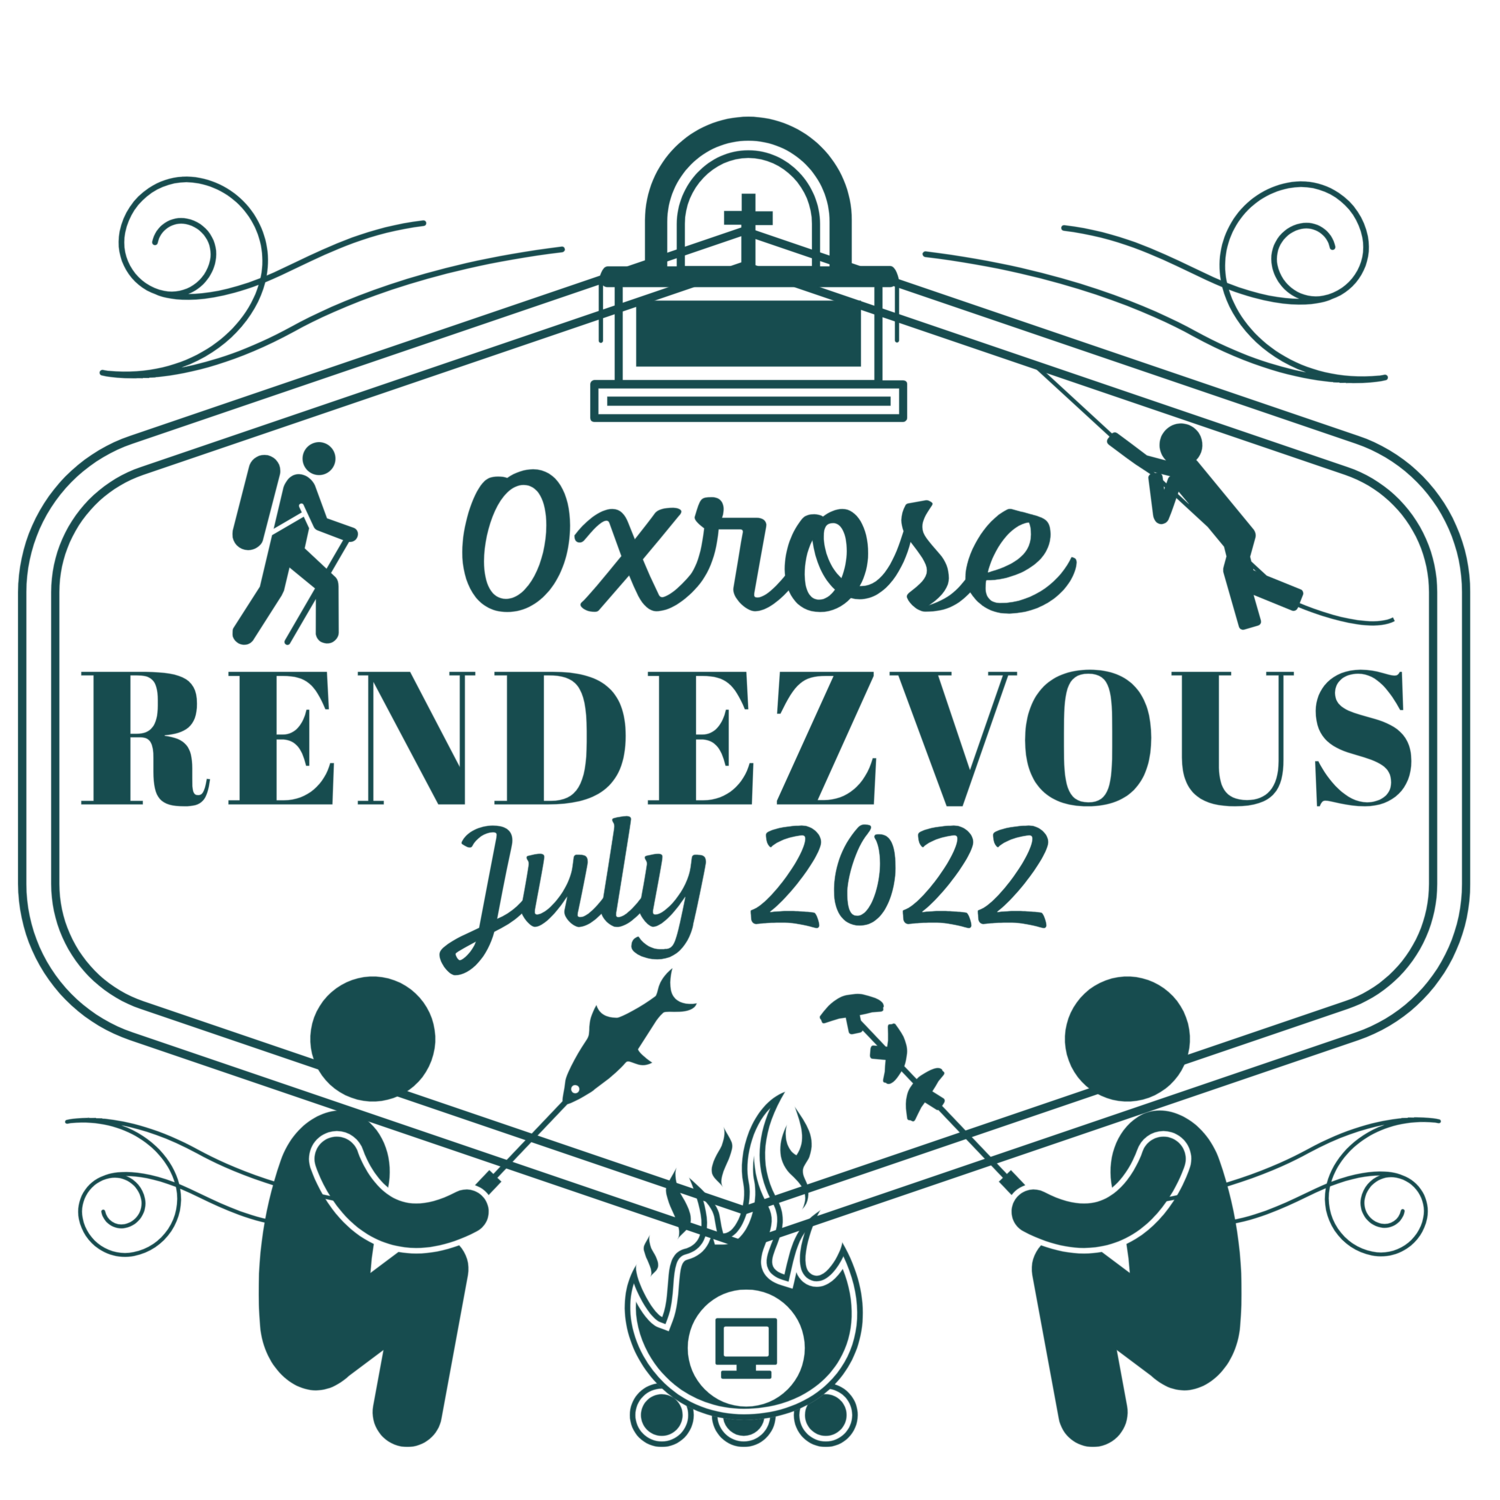 Oxrose Rendezvous 2022 Signup!